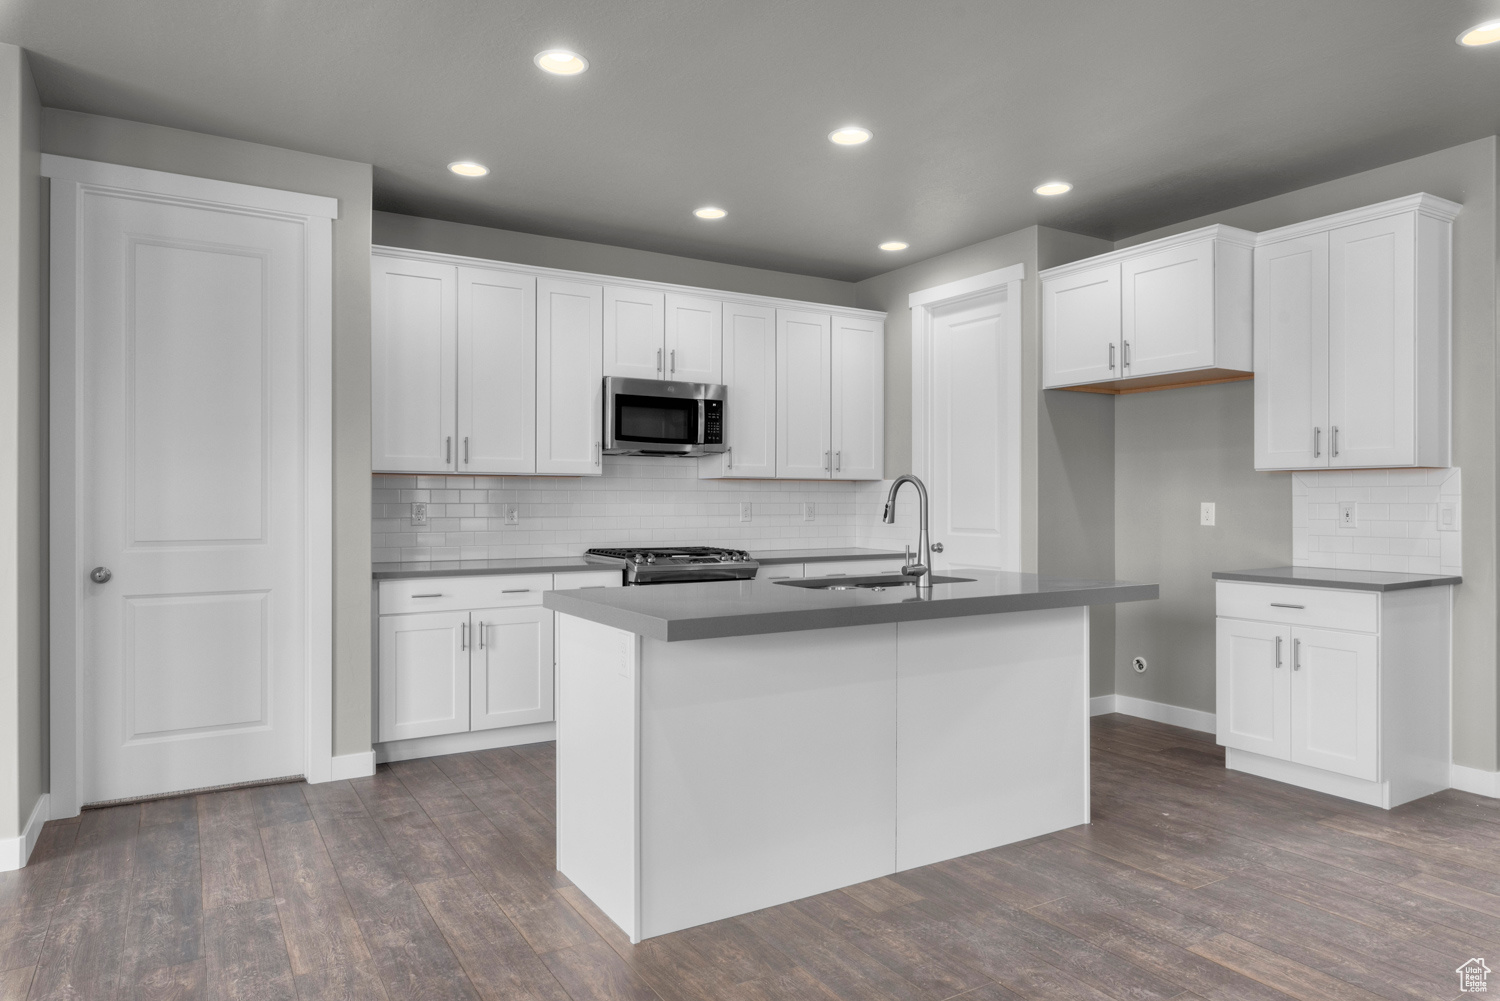 Kitchen featuring dark hardwood / wood-style flooring, appliances with stainless steel finishes, and white cabinetry